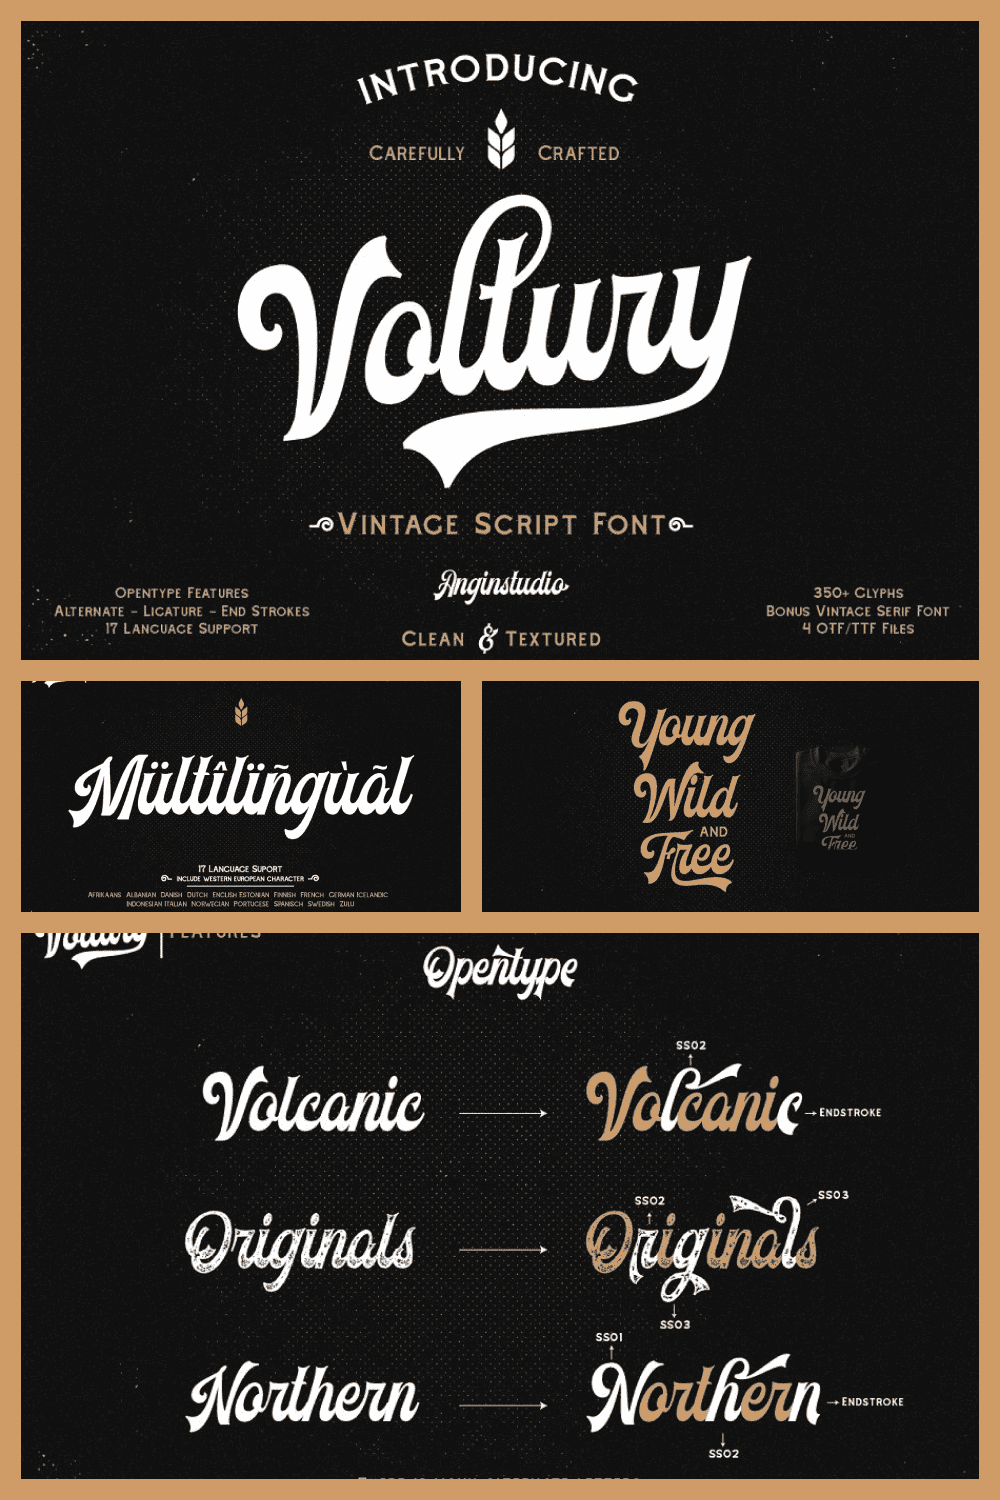 Thanksgiving voltury american vintage font duo.